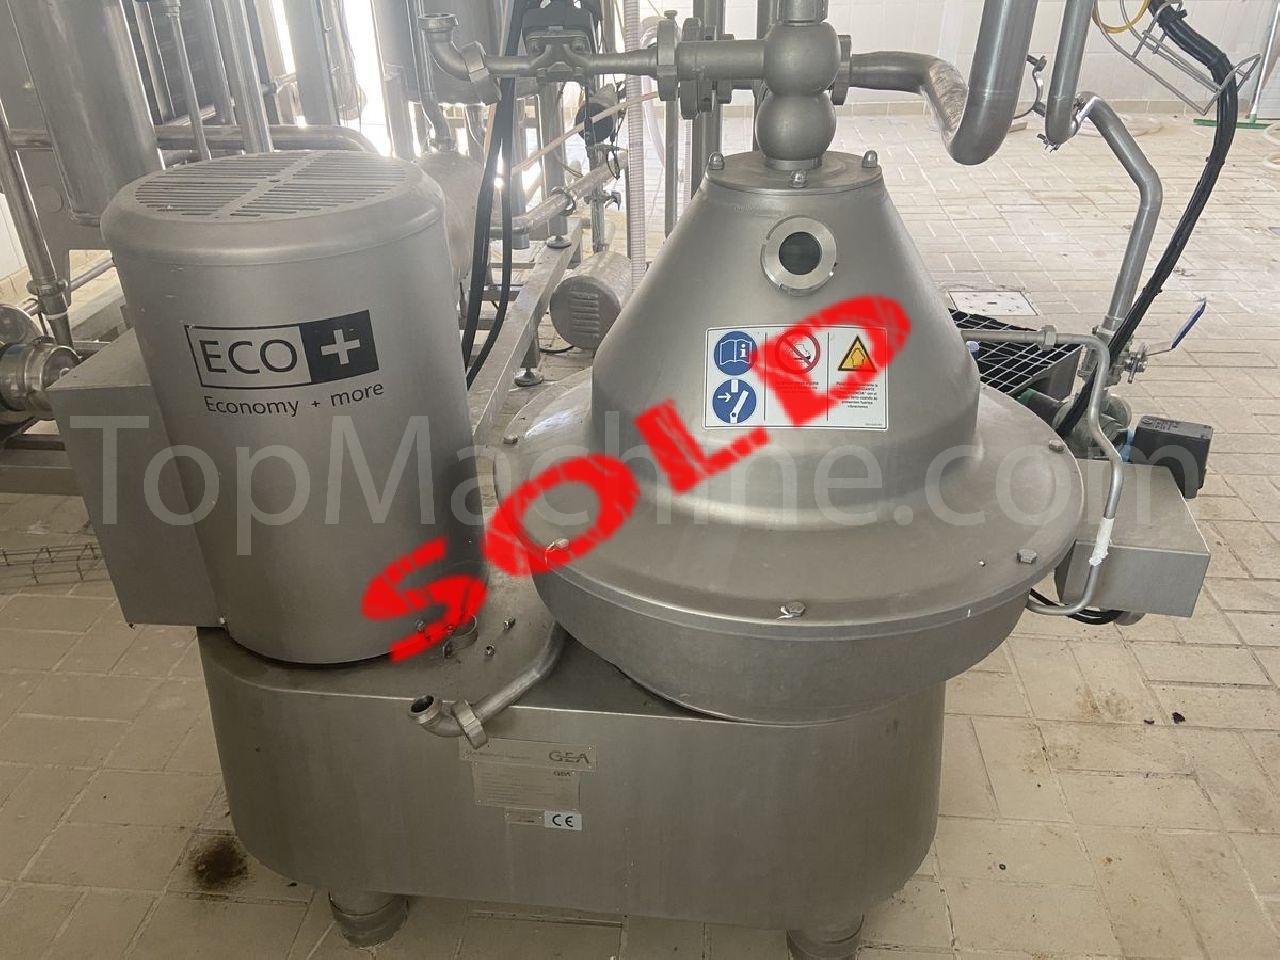 Used GEA Westfalia MSE85-01-177 Dairy & Juices Miscellaneous